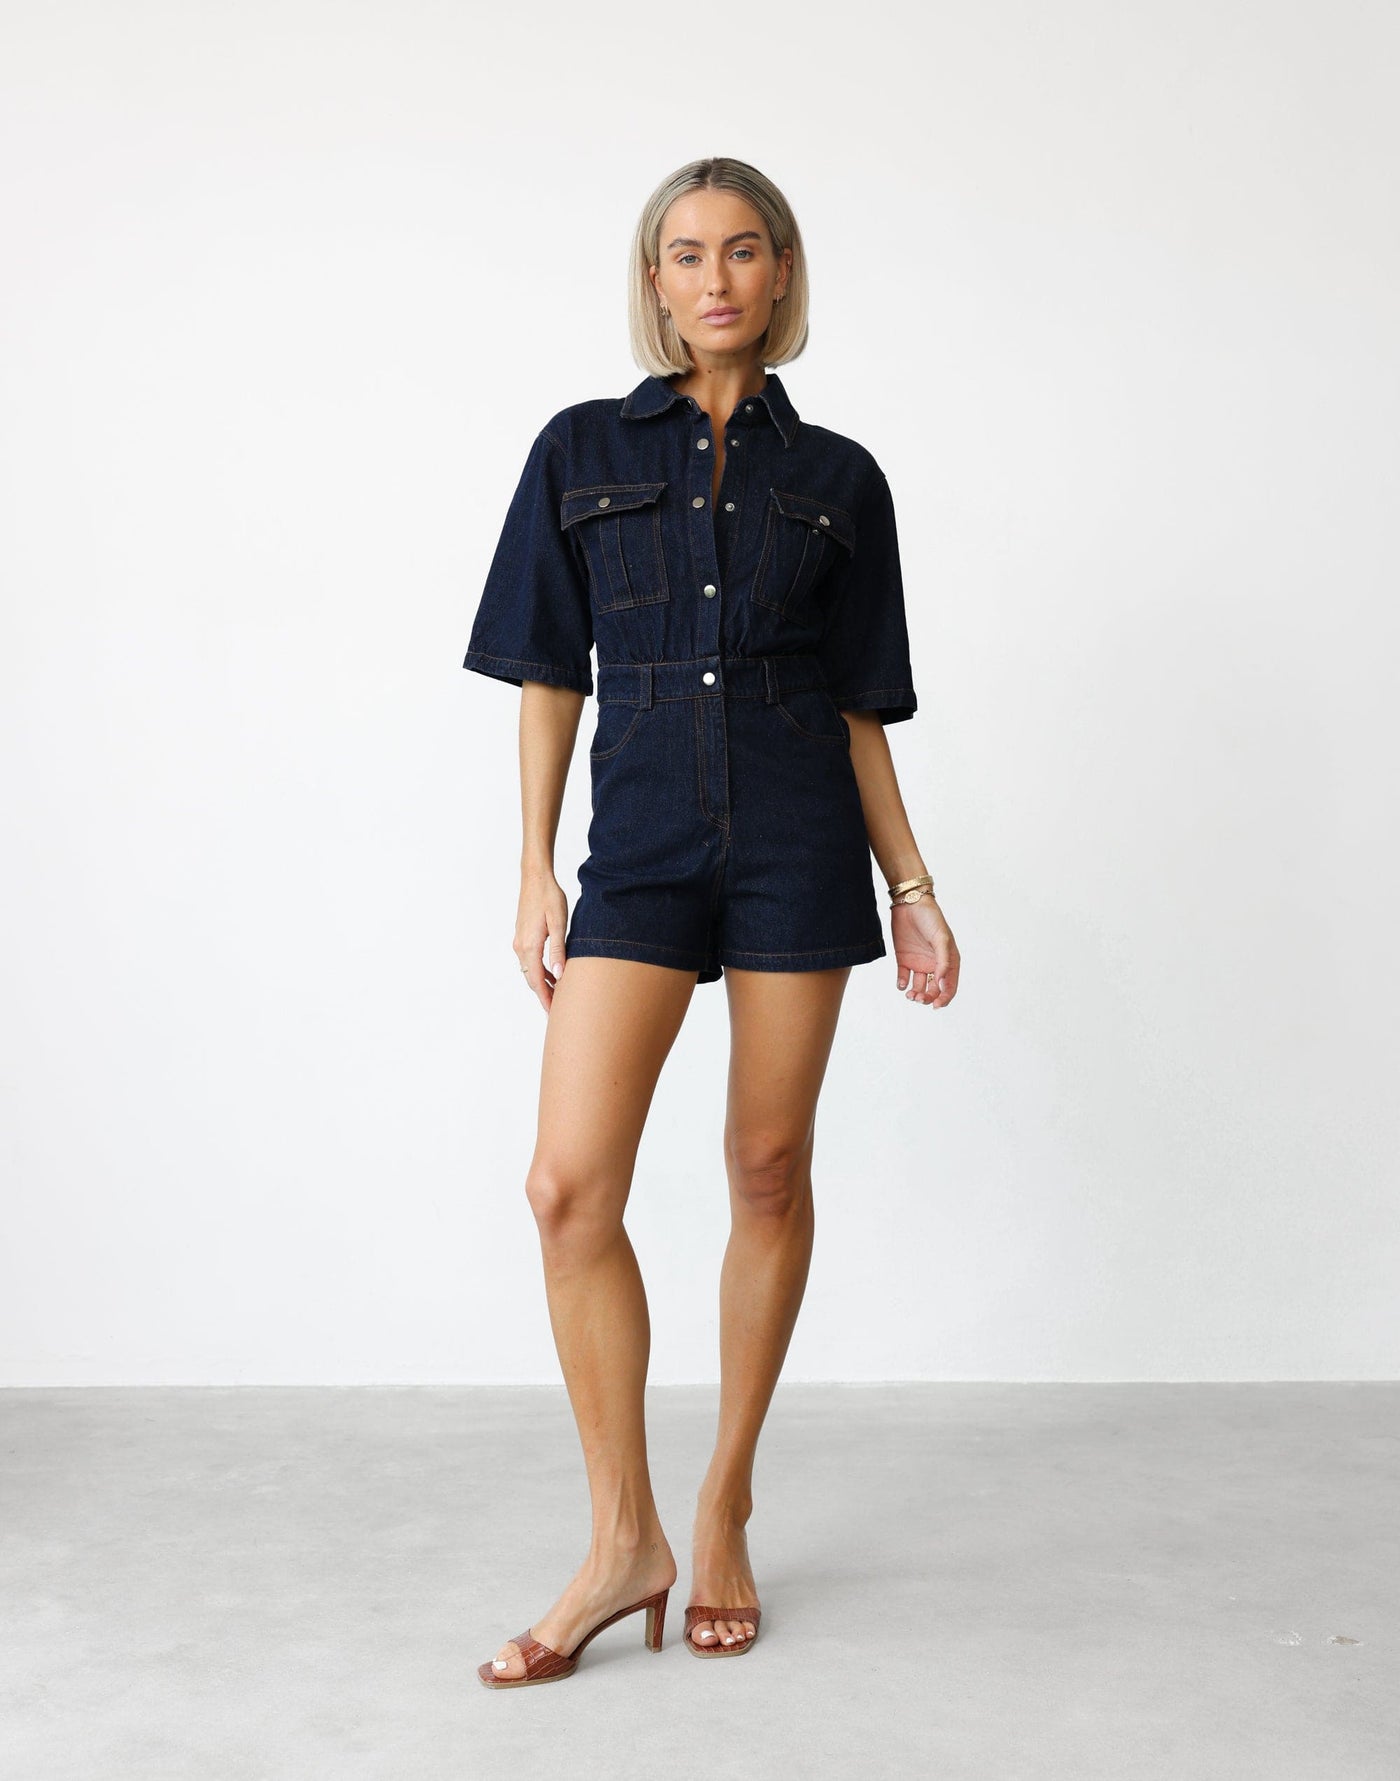 Darcy Playsuit (Dark Denim) - Button Closure Playsuit with Belt Loops - Women's Playsuit - Charcoal Clothing